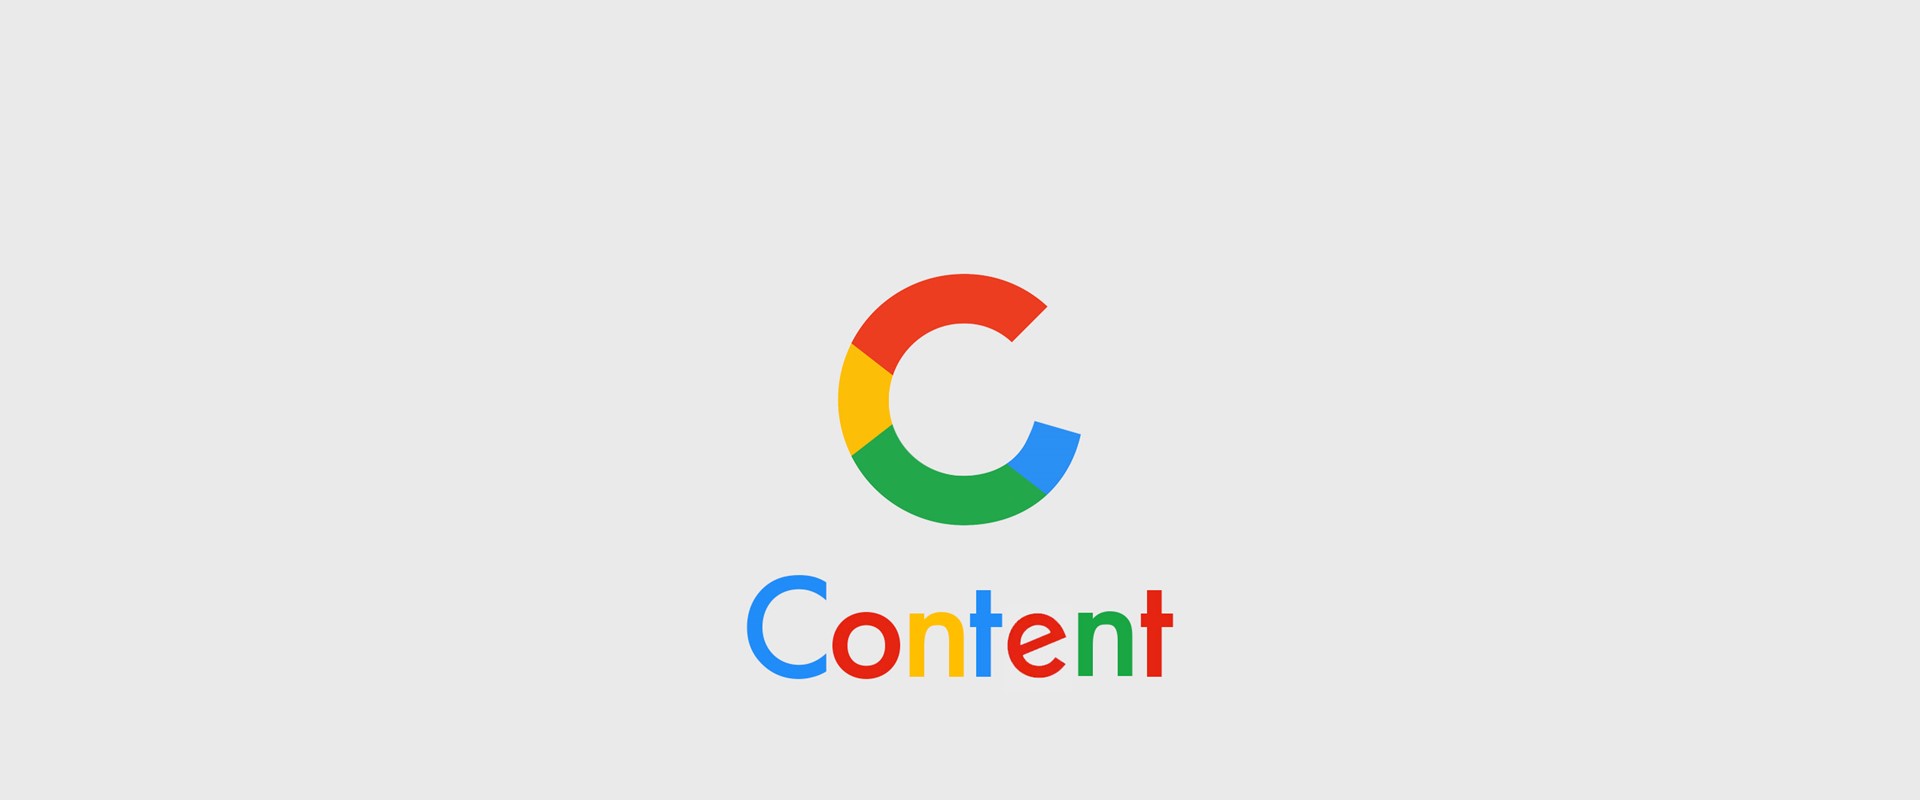 Content is key to Google rankings